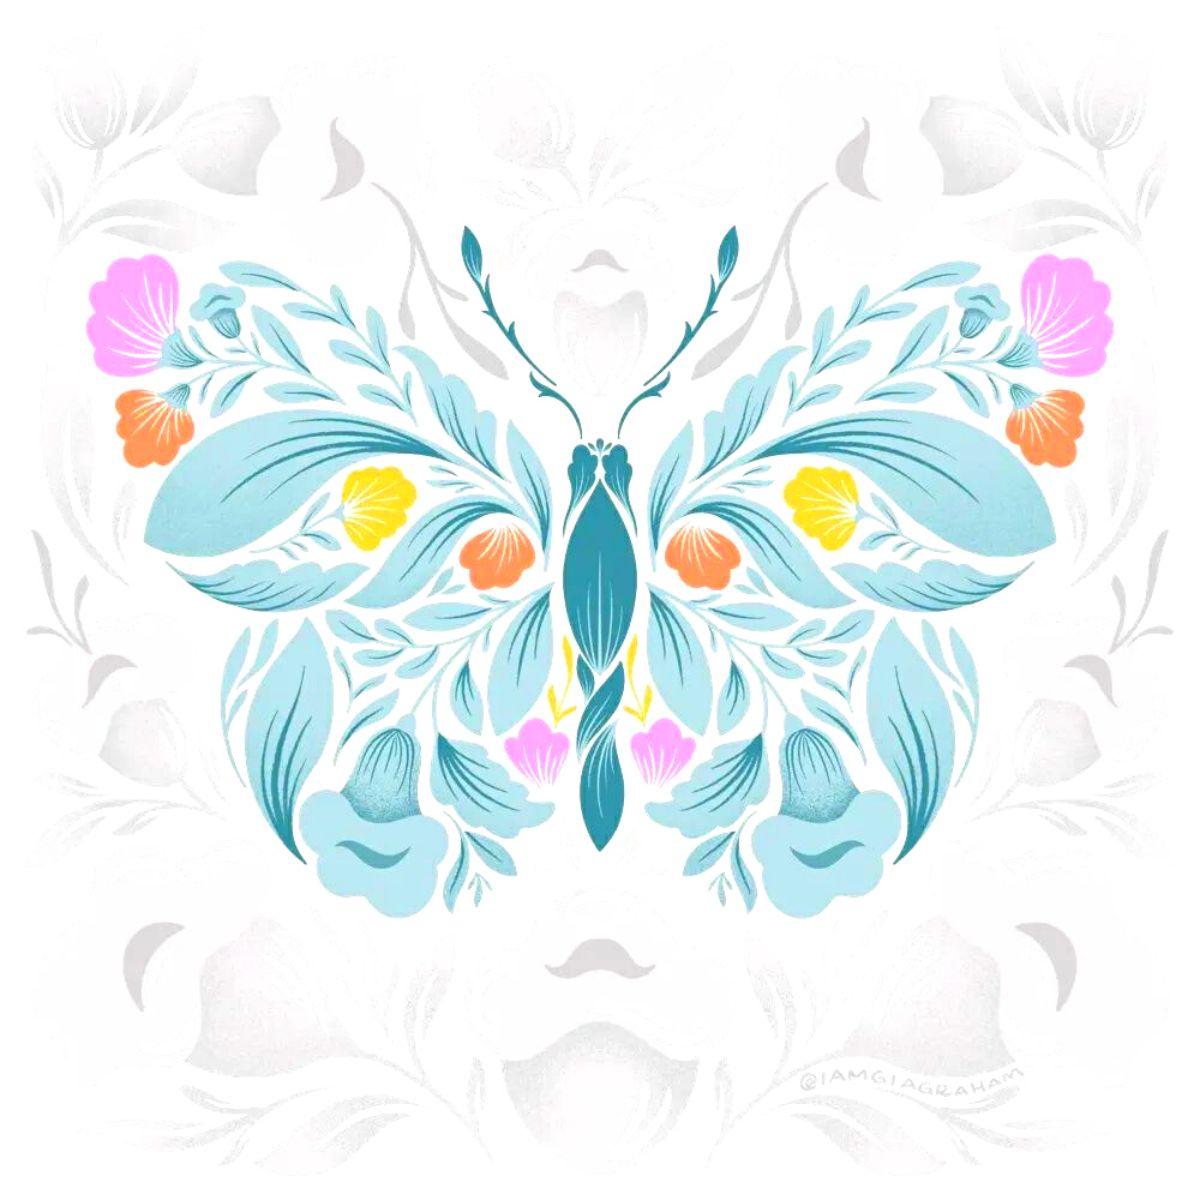 Blooming butterfly by Gia Graham